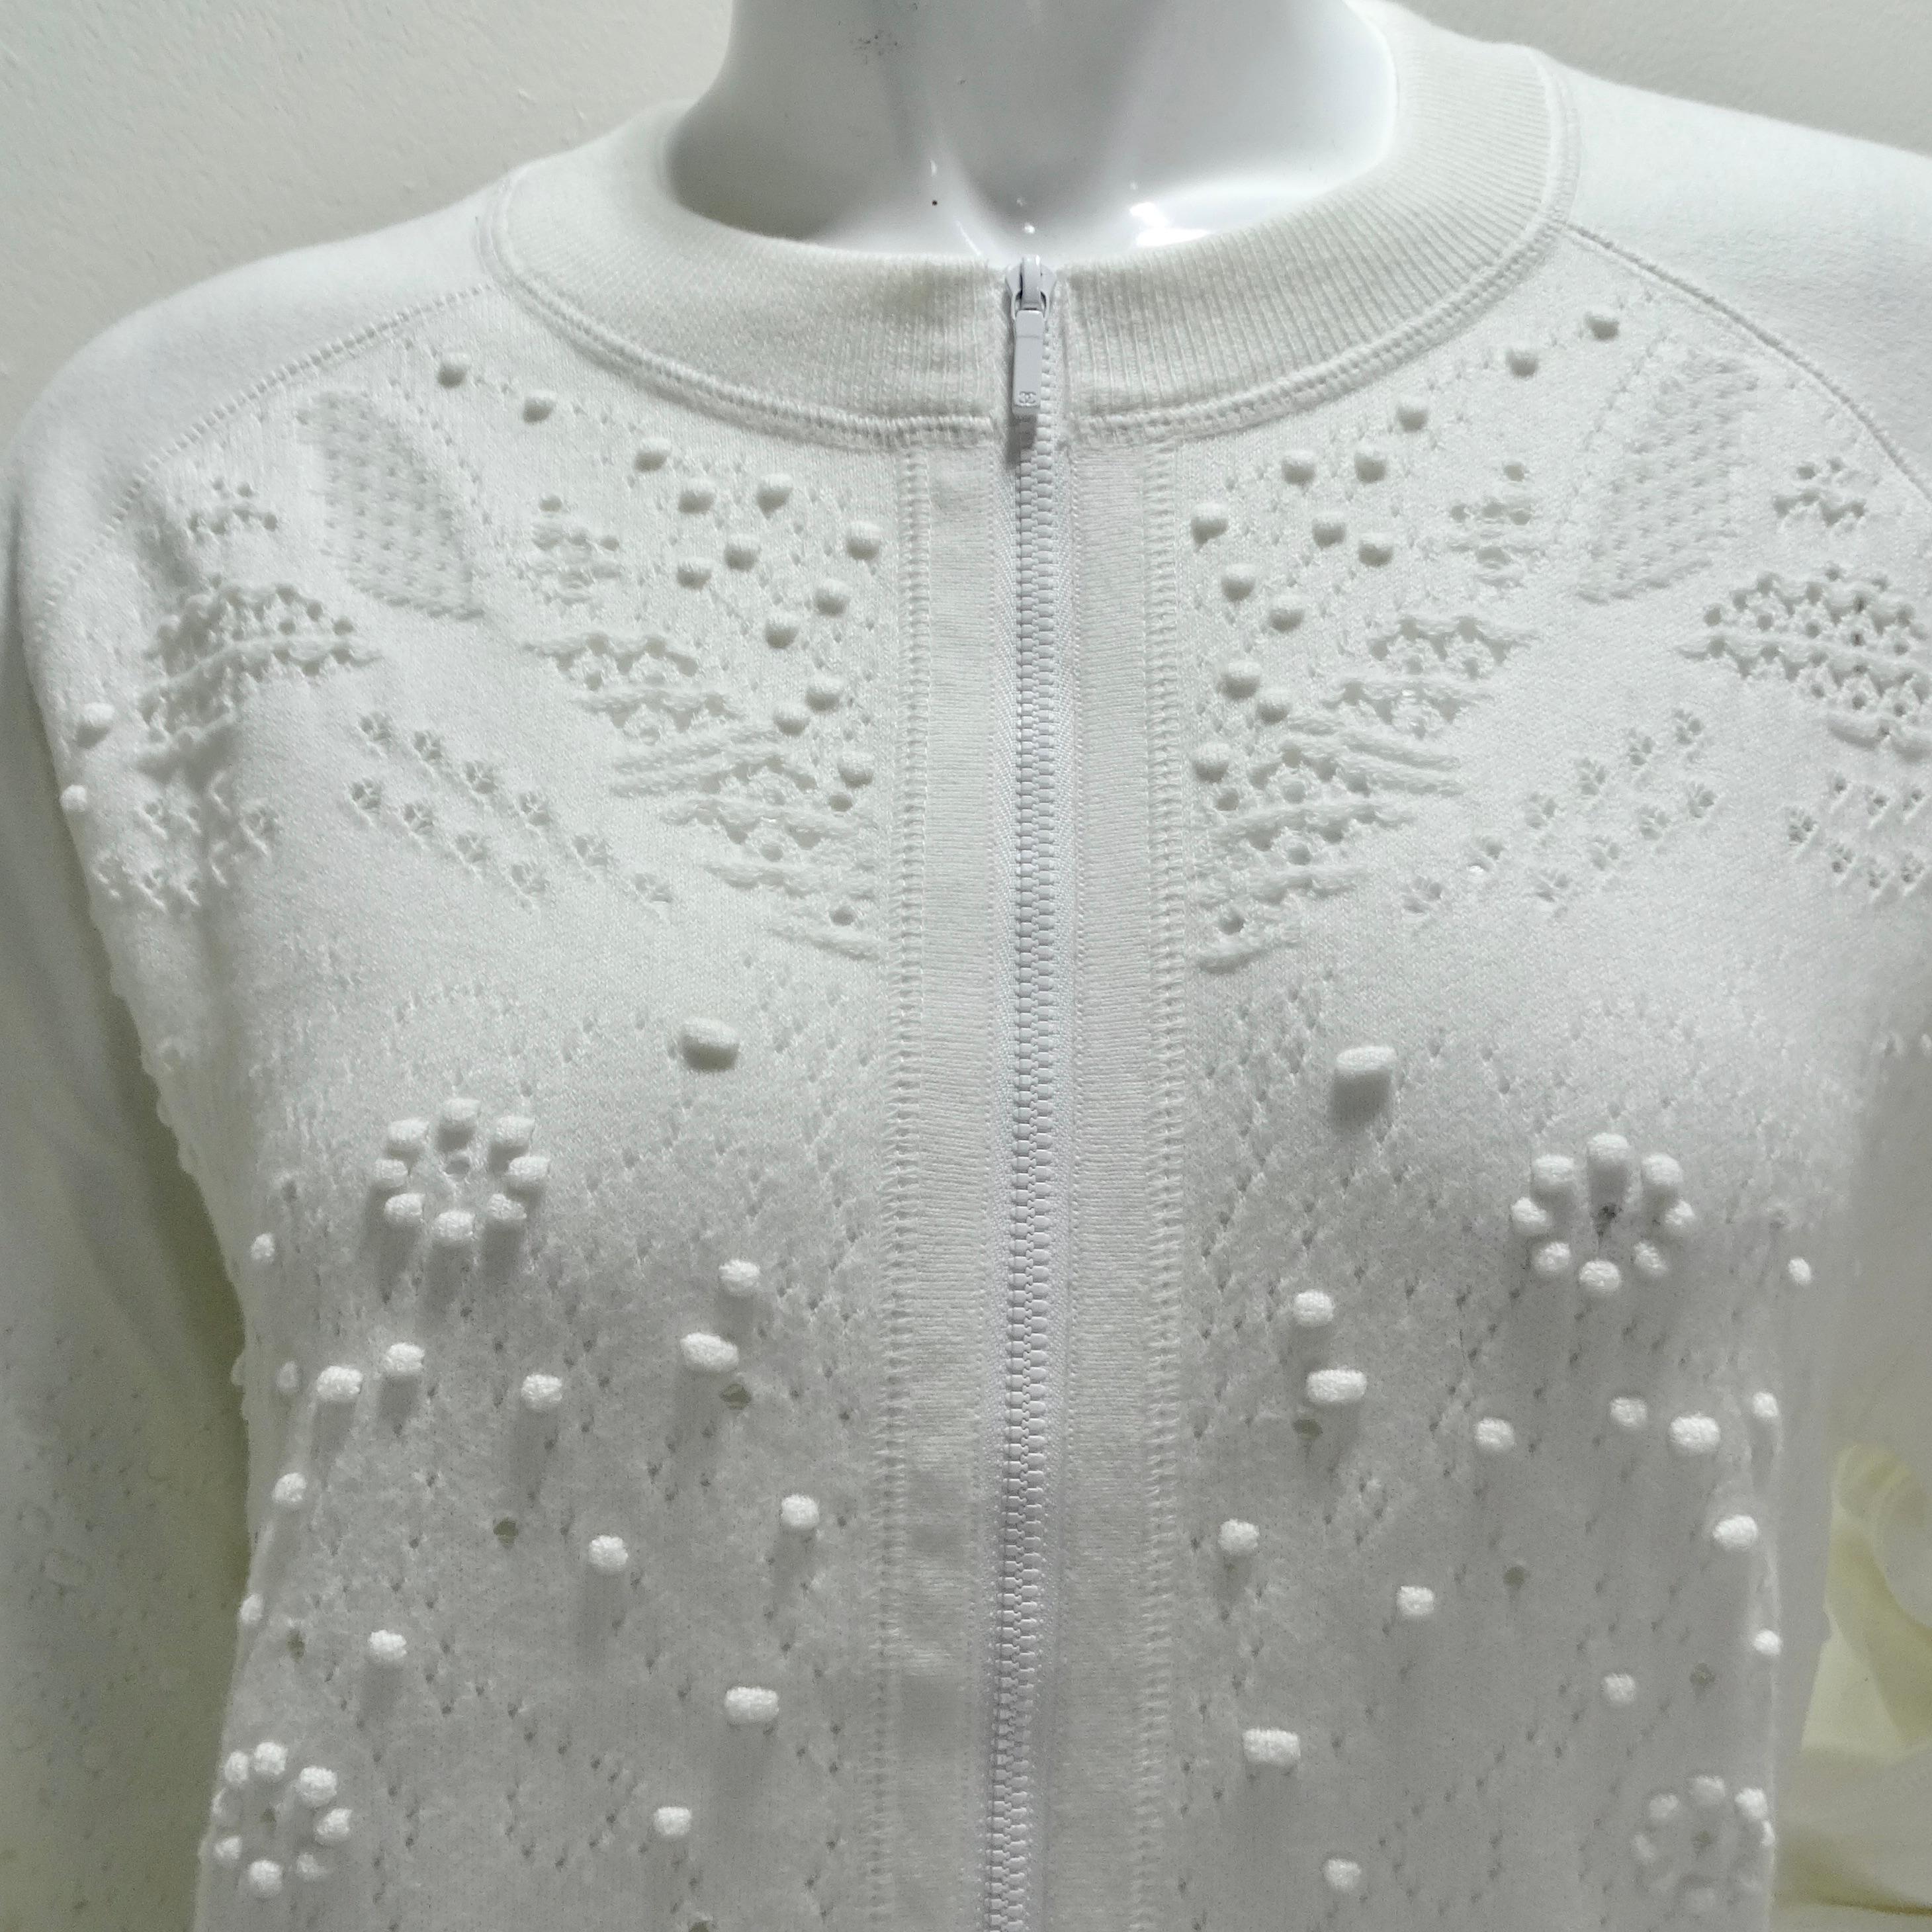 The Chanel White Perforated Knit Zip Up Sweater is a luxurious and versatile piece that seamlessly combines comfort with Chanel's signature elegance. This classic crewneck zip-up sweater is crafted from white cotton knit, featuring unique perforated